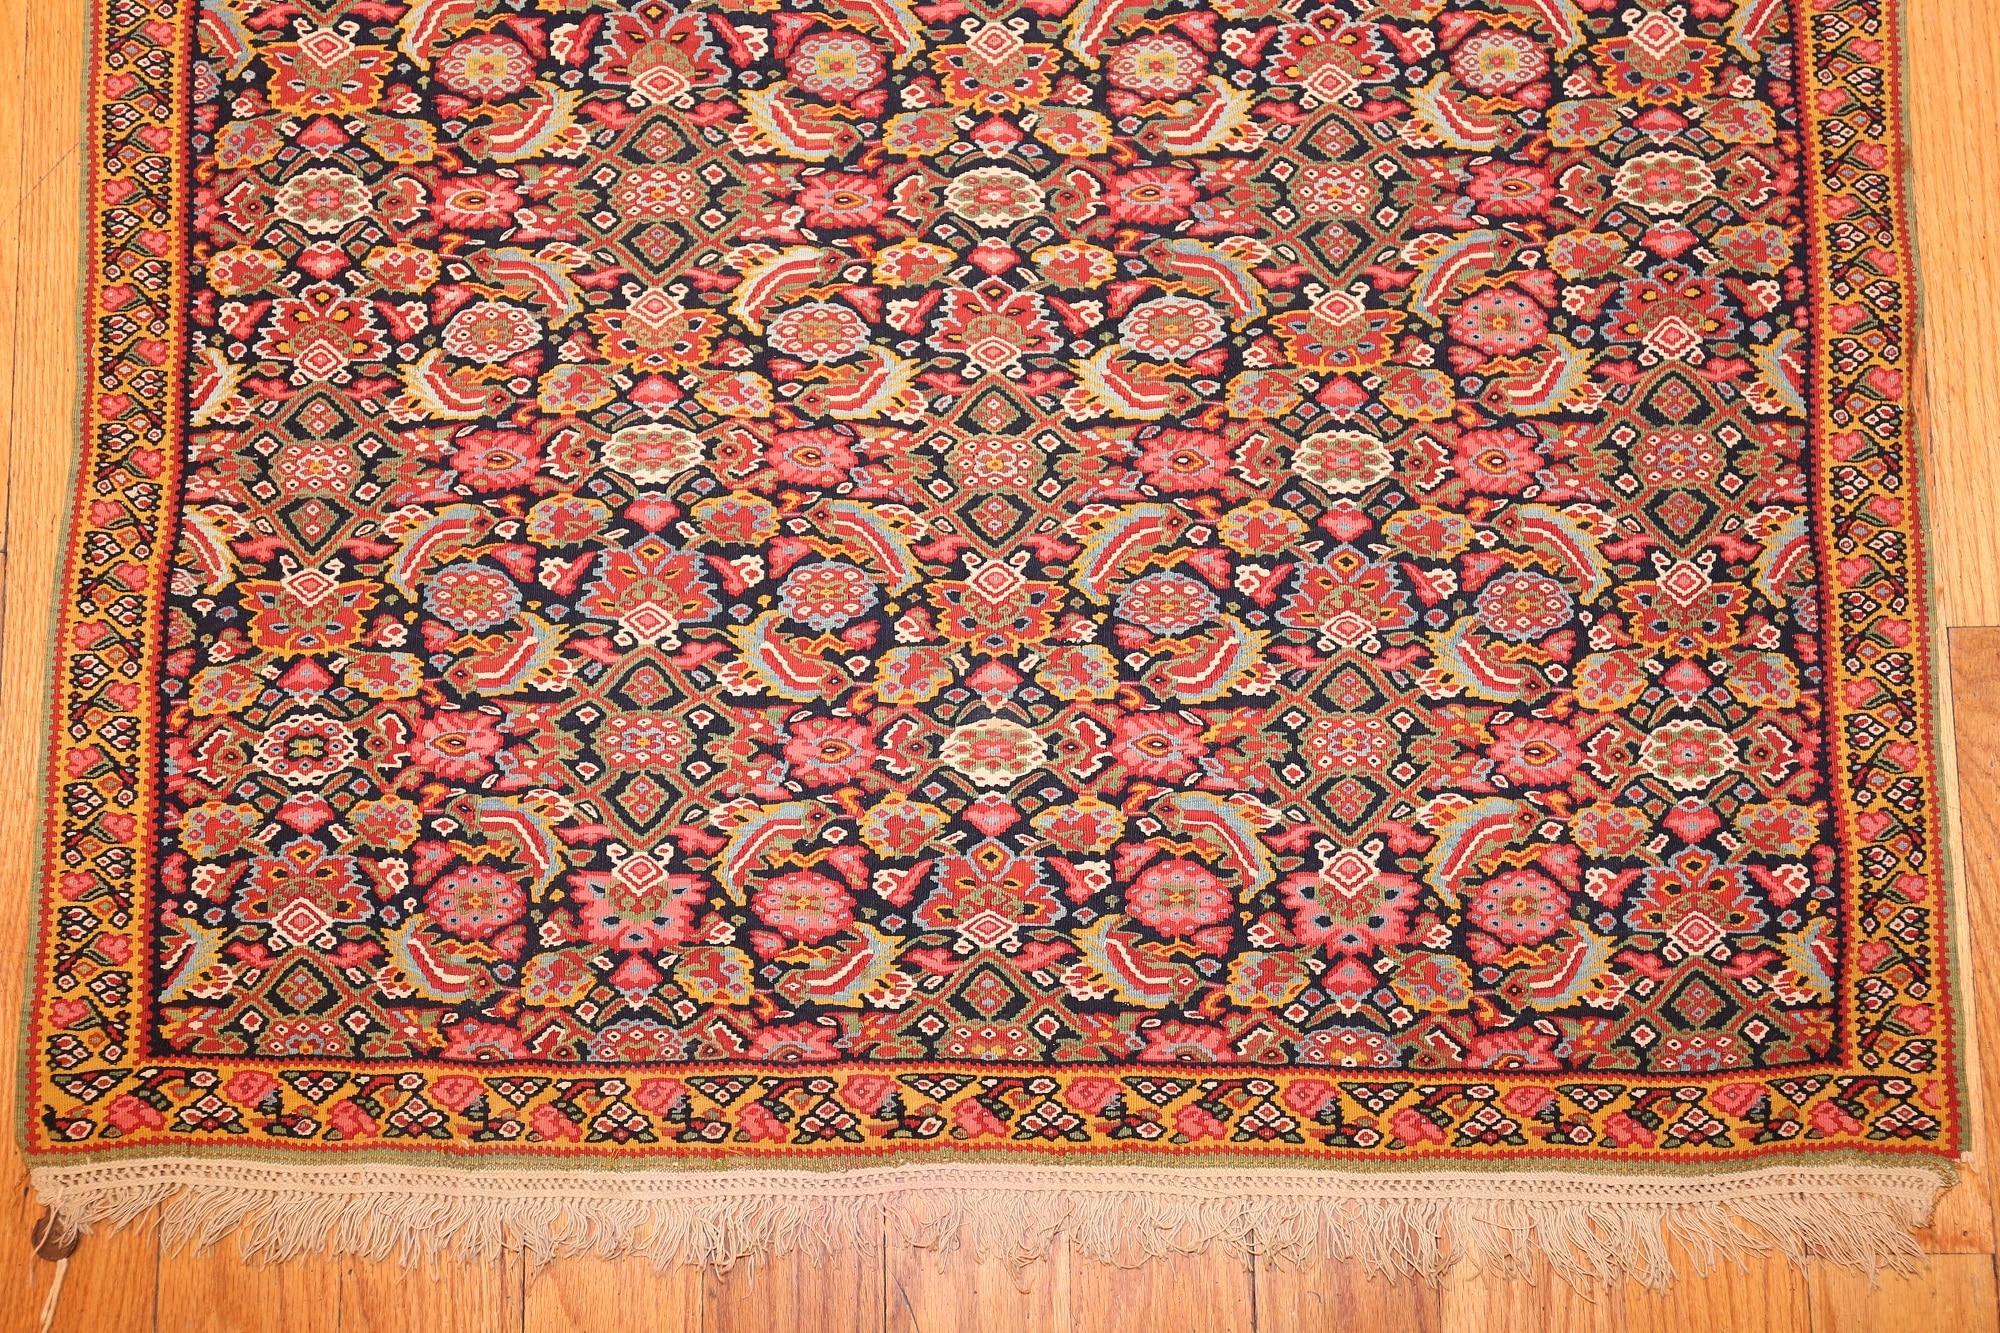 Small and finely woven fish design antique Persian Senneh Kilim rug, country of origin: Persia, date: circa 1900. Size: 3 ft x 4 ft (0.91 m x 1.22 m).

